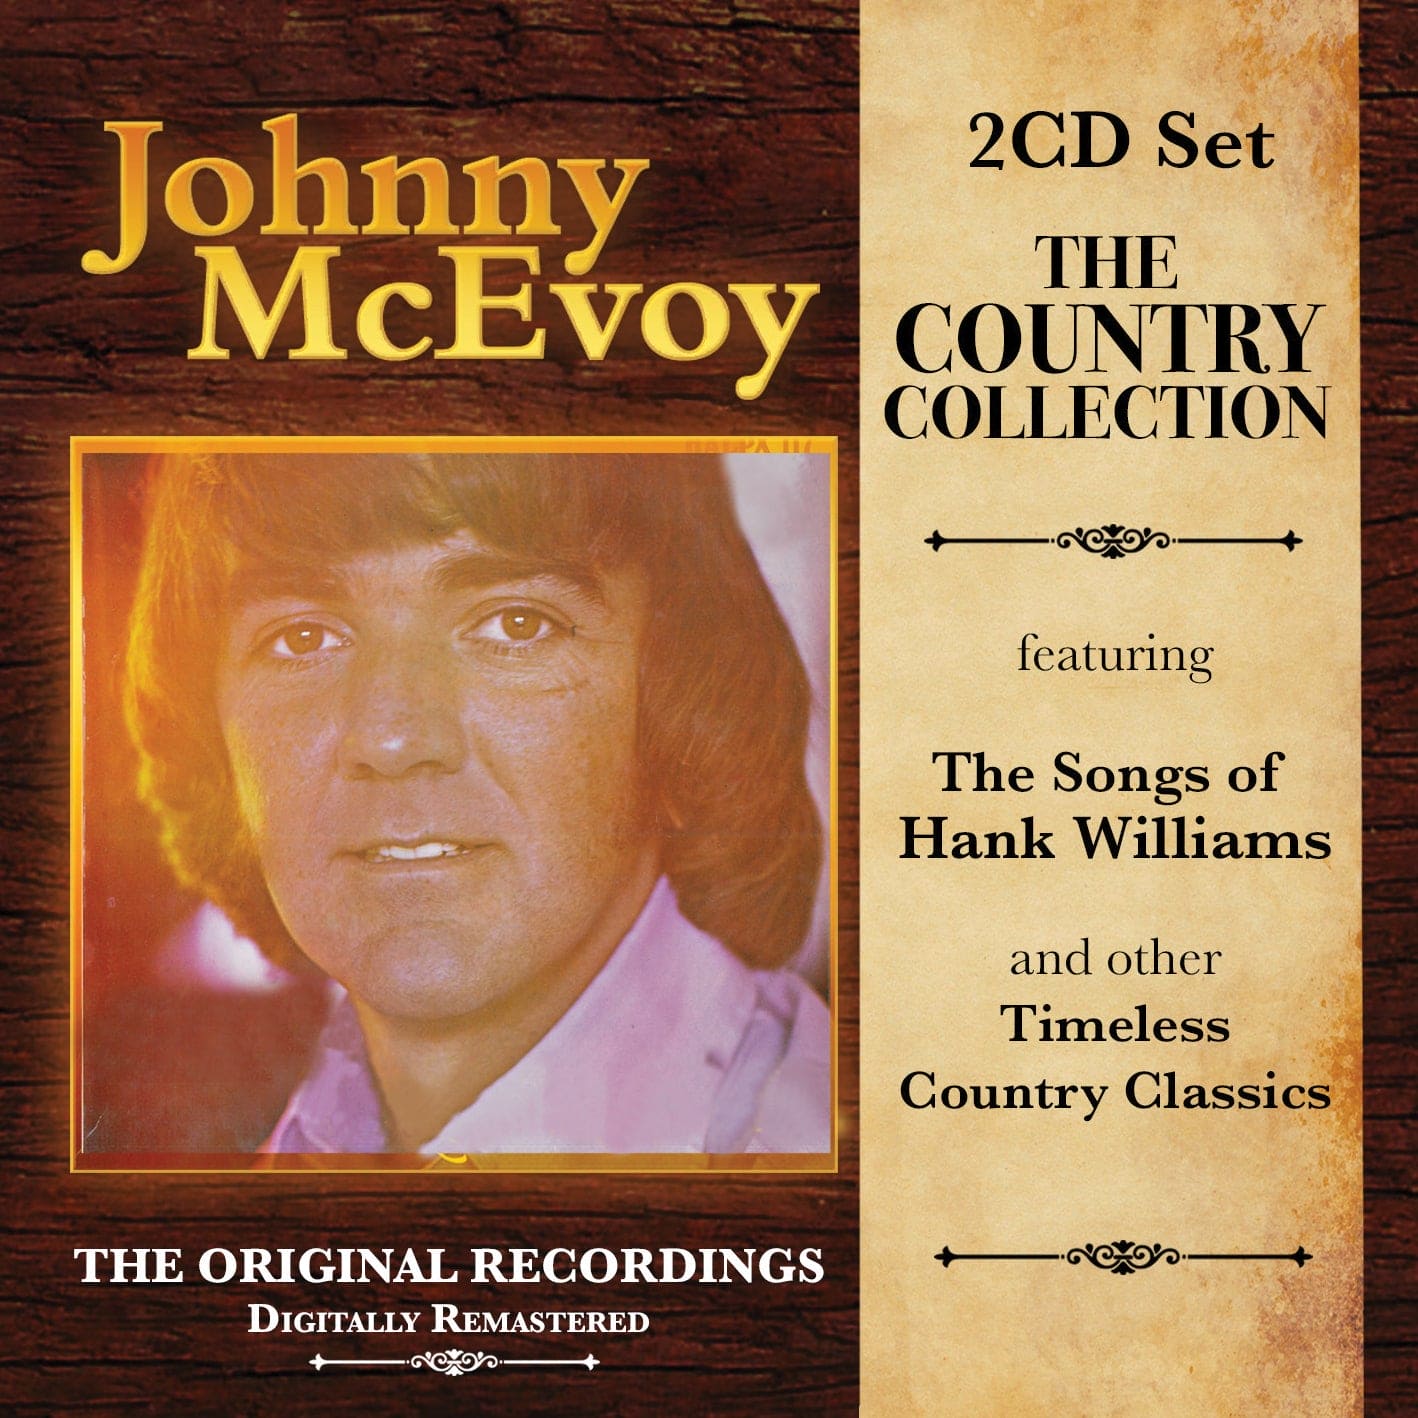 The Country Collection - Johnny McEvoy [2CD]